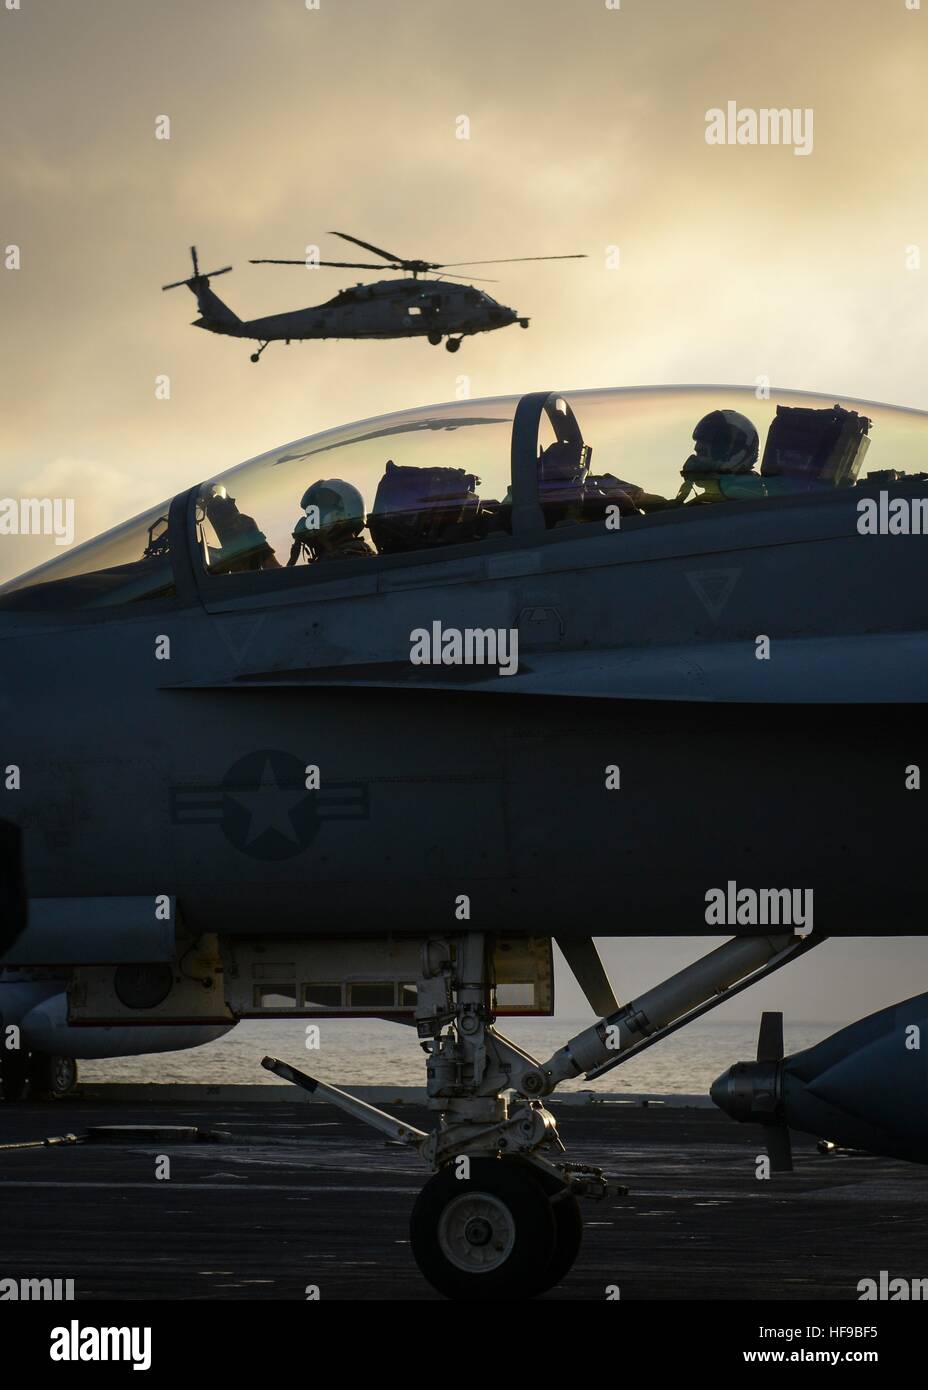 A Boeing F/A-18E Super Hornet fighter aircraft taxis on the flight deck of the USN Nimitz-class aircraft carrier USS Nimitz at sunset December 5, 2016 in the Pacific Ocean. Stock Photo